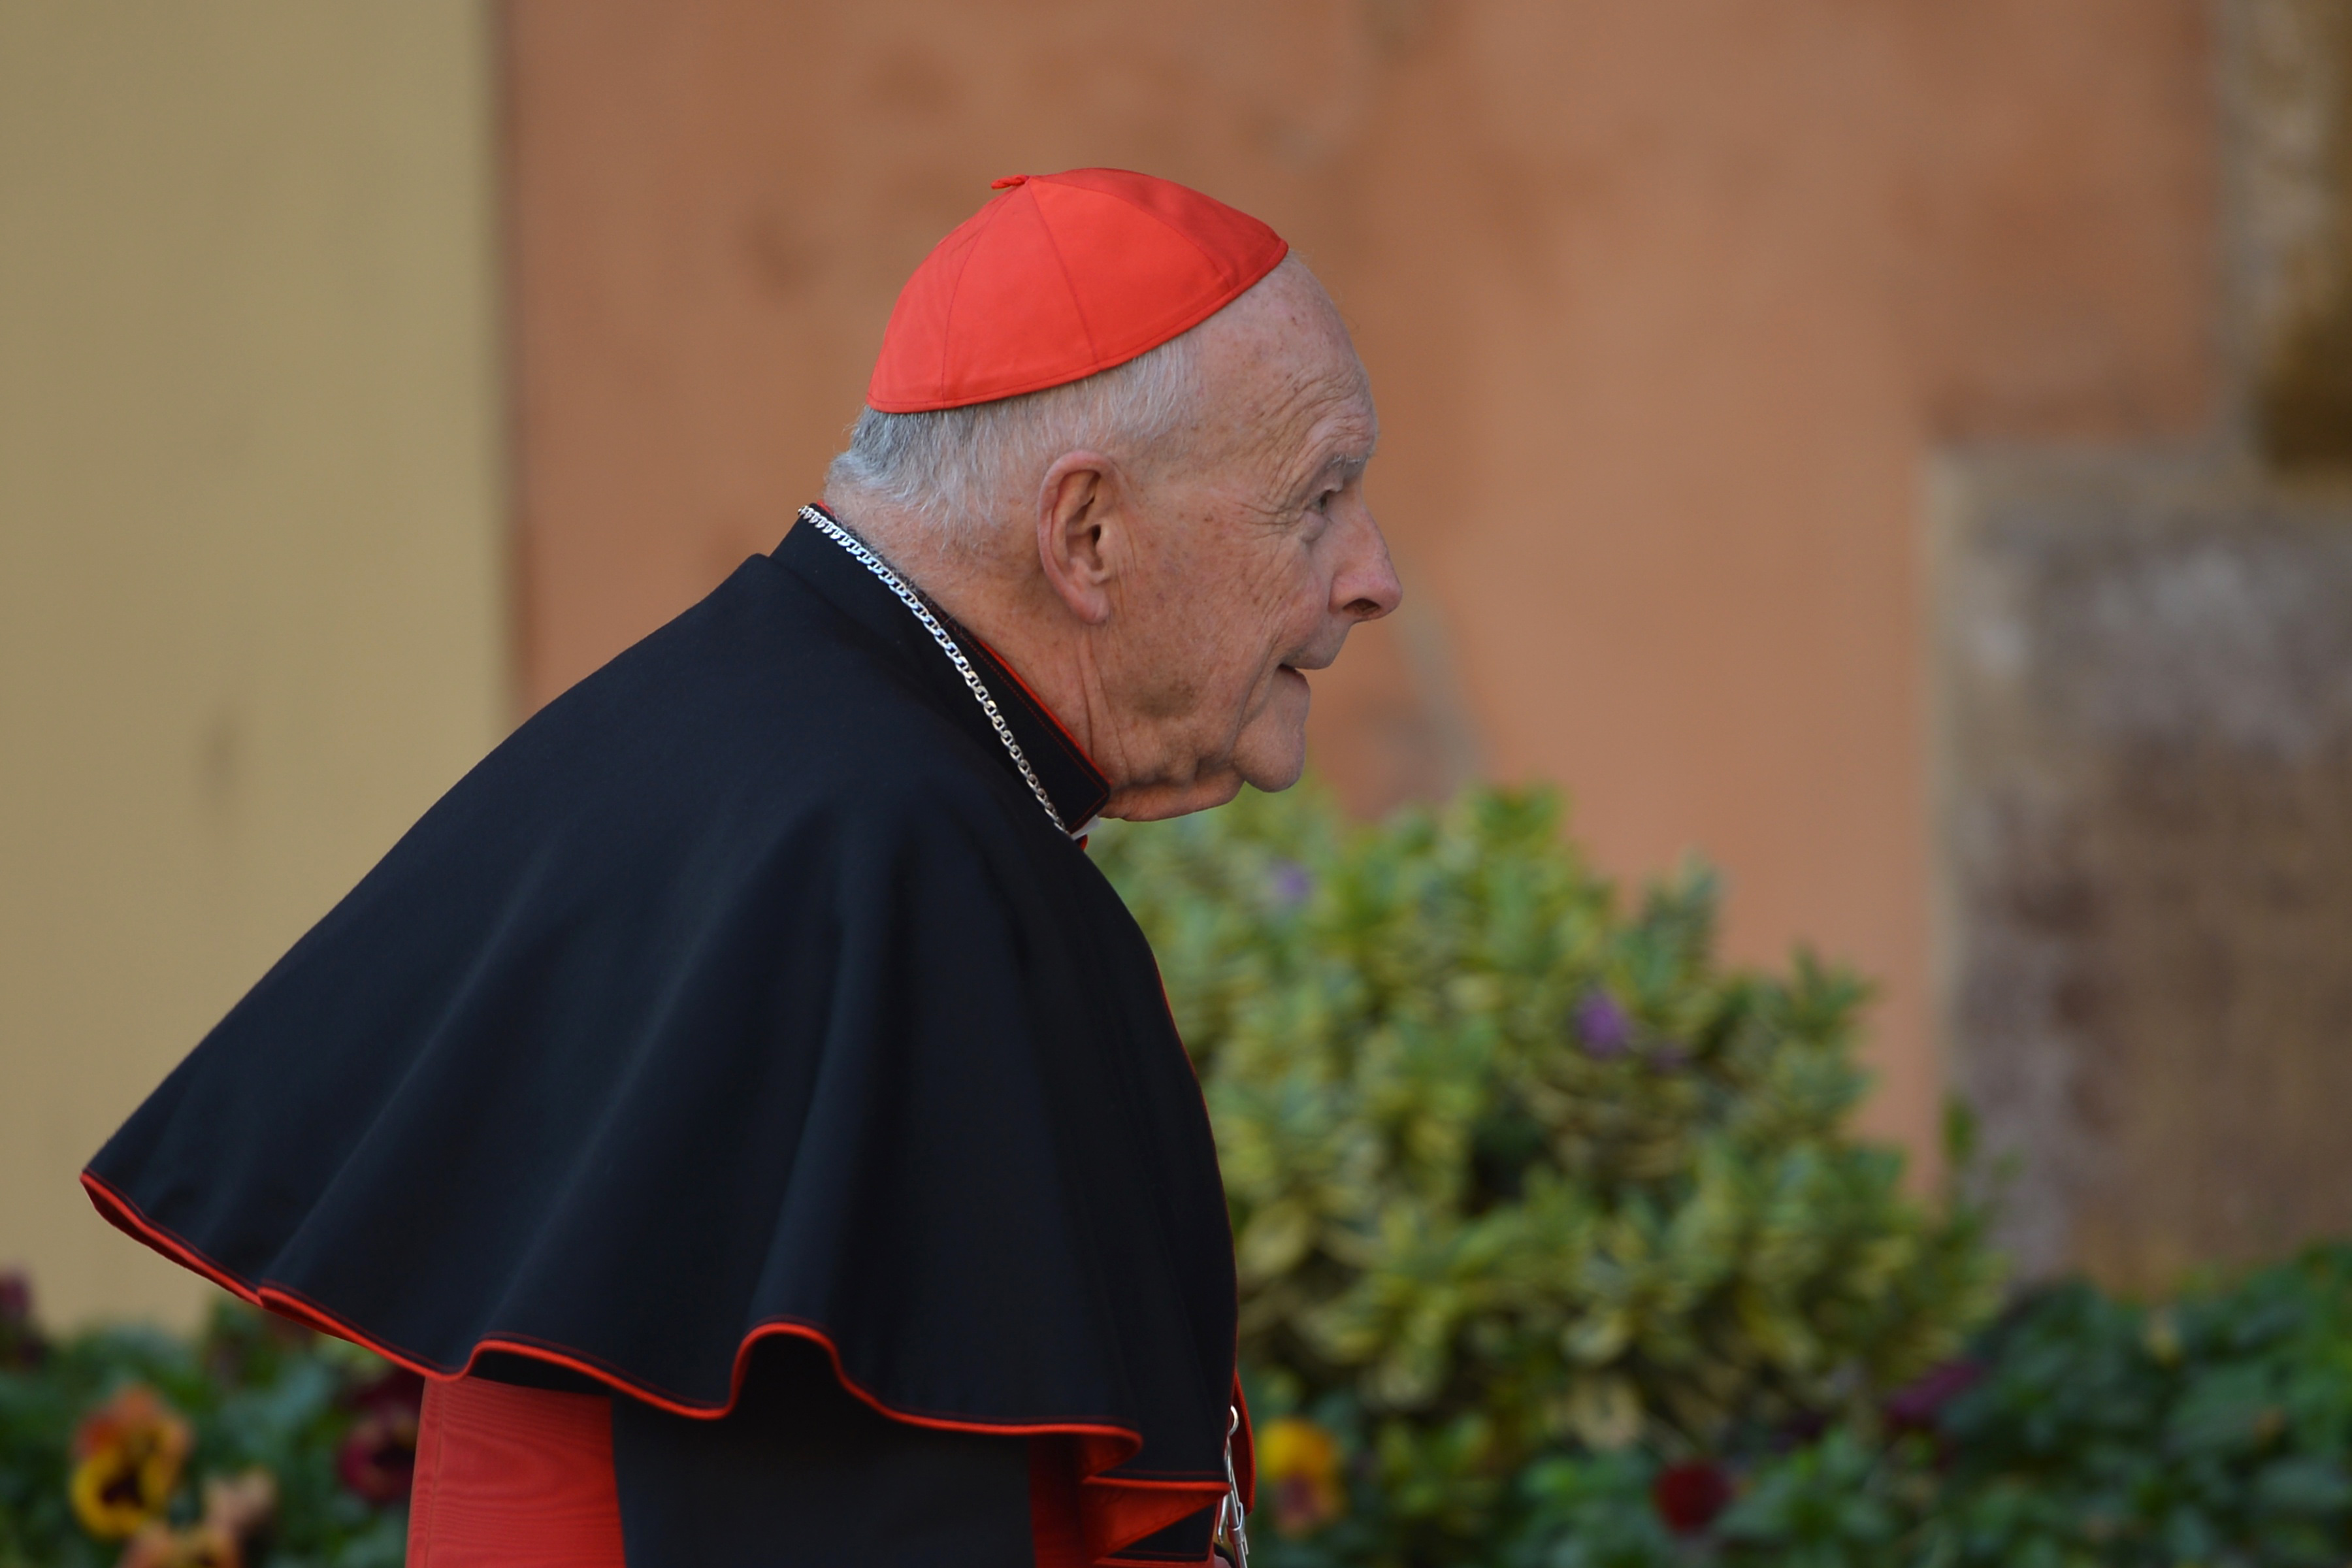 US cardinal Edgar Theodore McCarrick arrives for talks ahead of a conclave to elect a new pope on March 4, 2013 at the Vatican. The Vatican meetings will set the date for the start of the conclave this month and help identify candidates among the cardinals to be the next leader of the world's 1.2 billion Catholics. (VINCENZO PINTO/AFP/Getty Images)